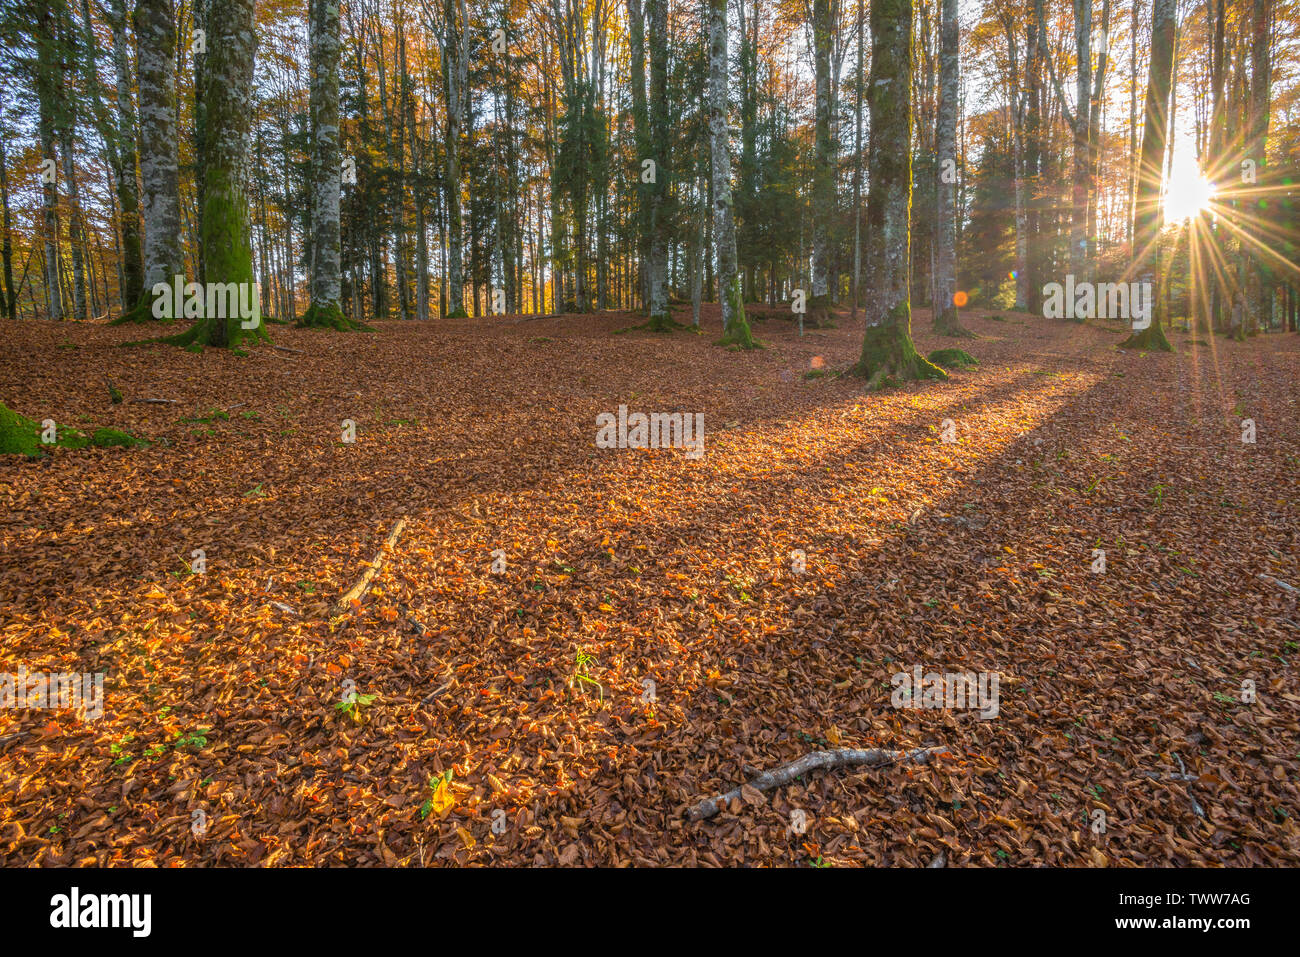 Sun setting through the trees in a beech forest in Cansiglio, Italy. October foliage, dead leaves carpet, mossy white bark trees. Tree shadows. Stock Photo